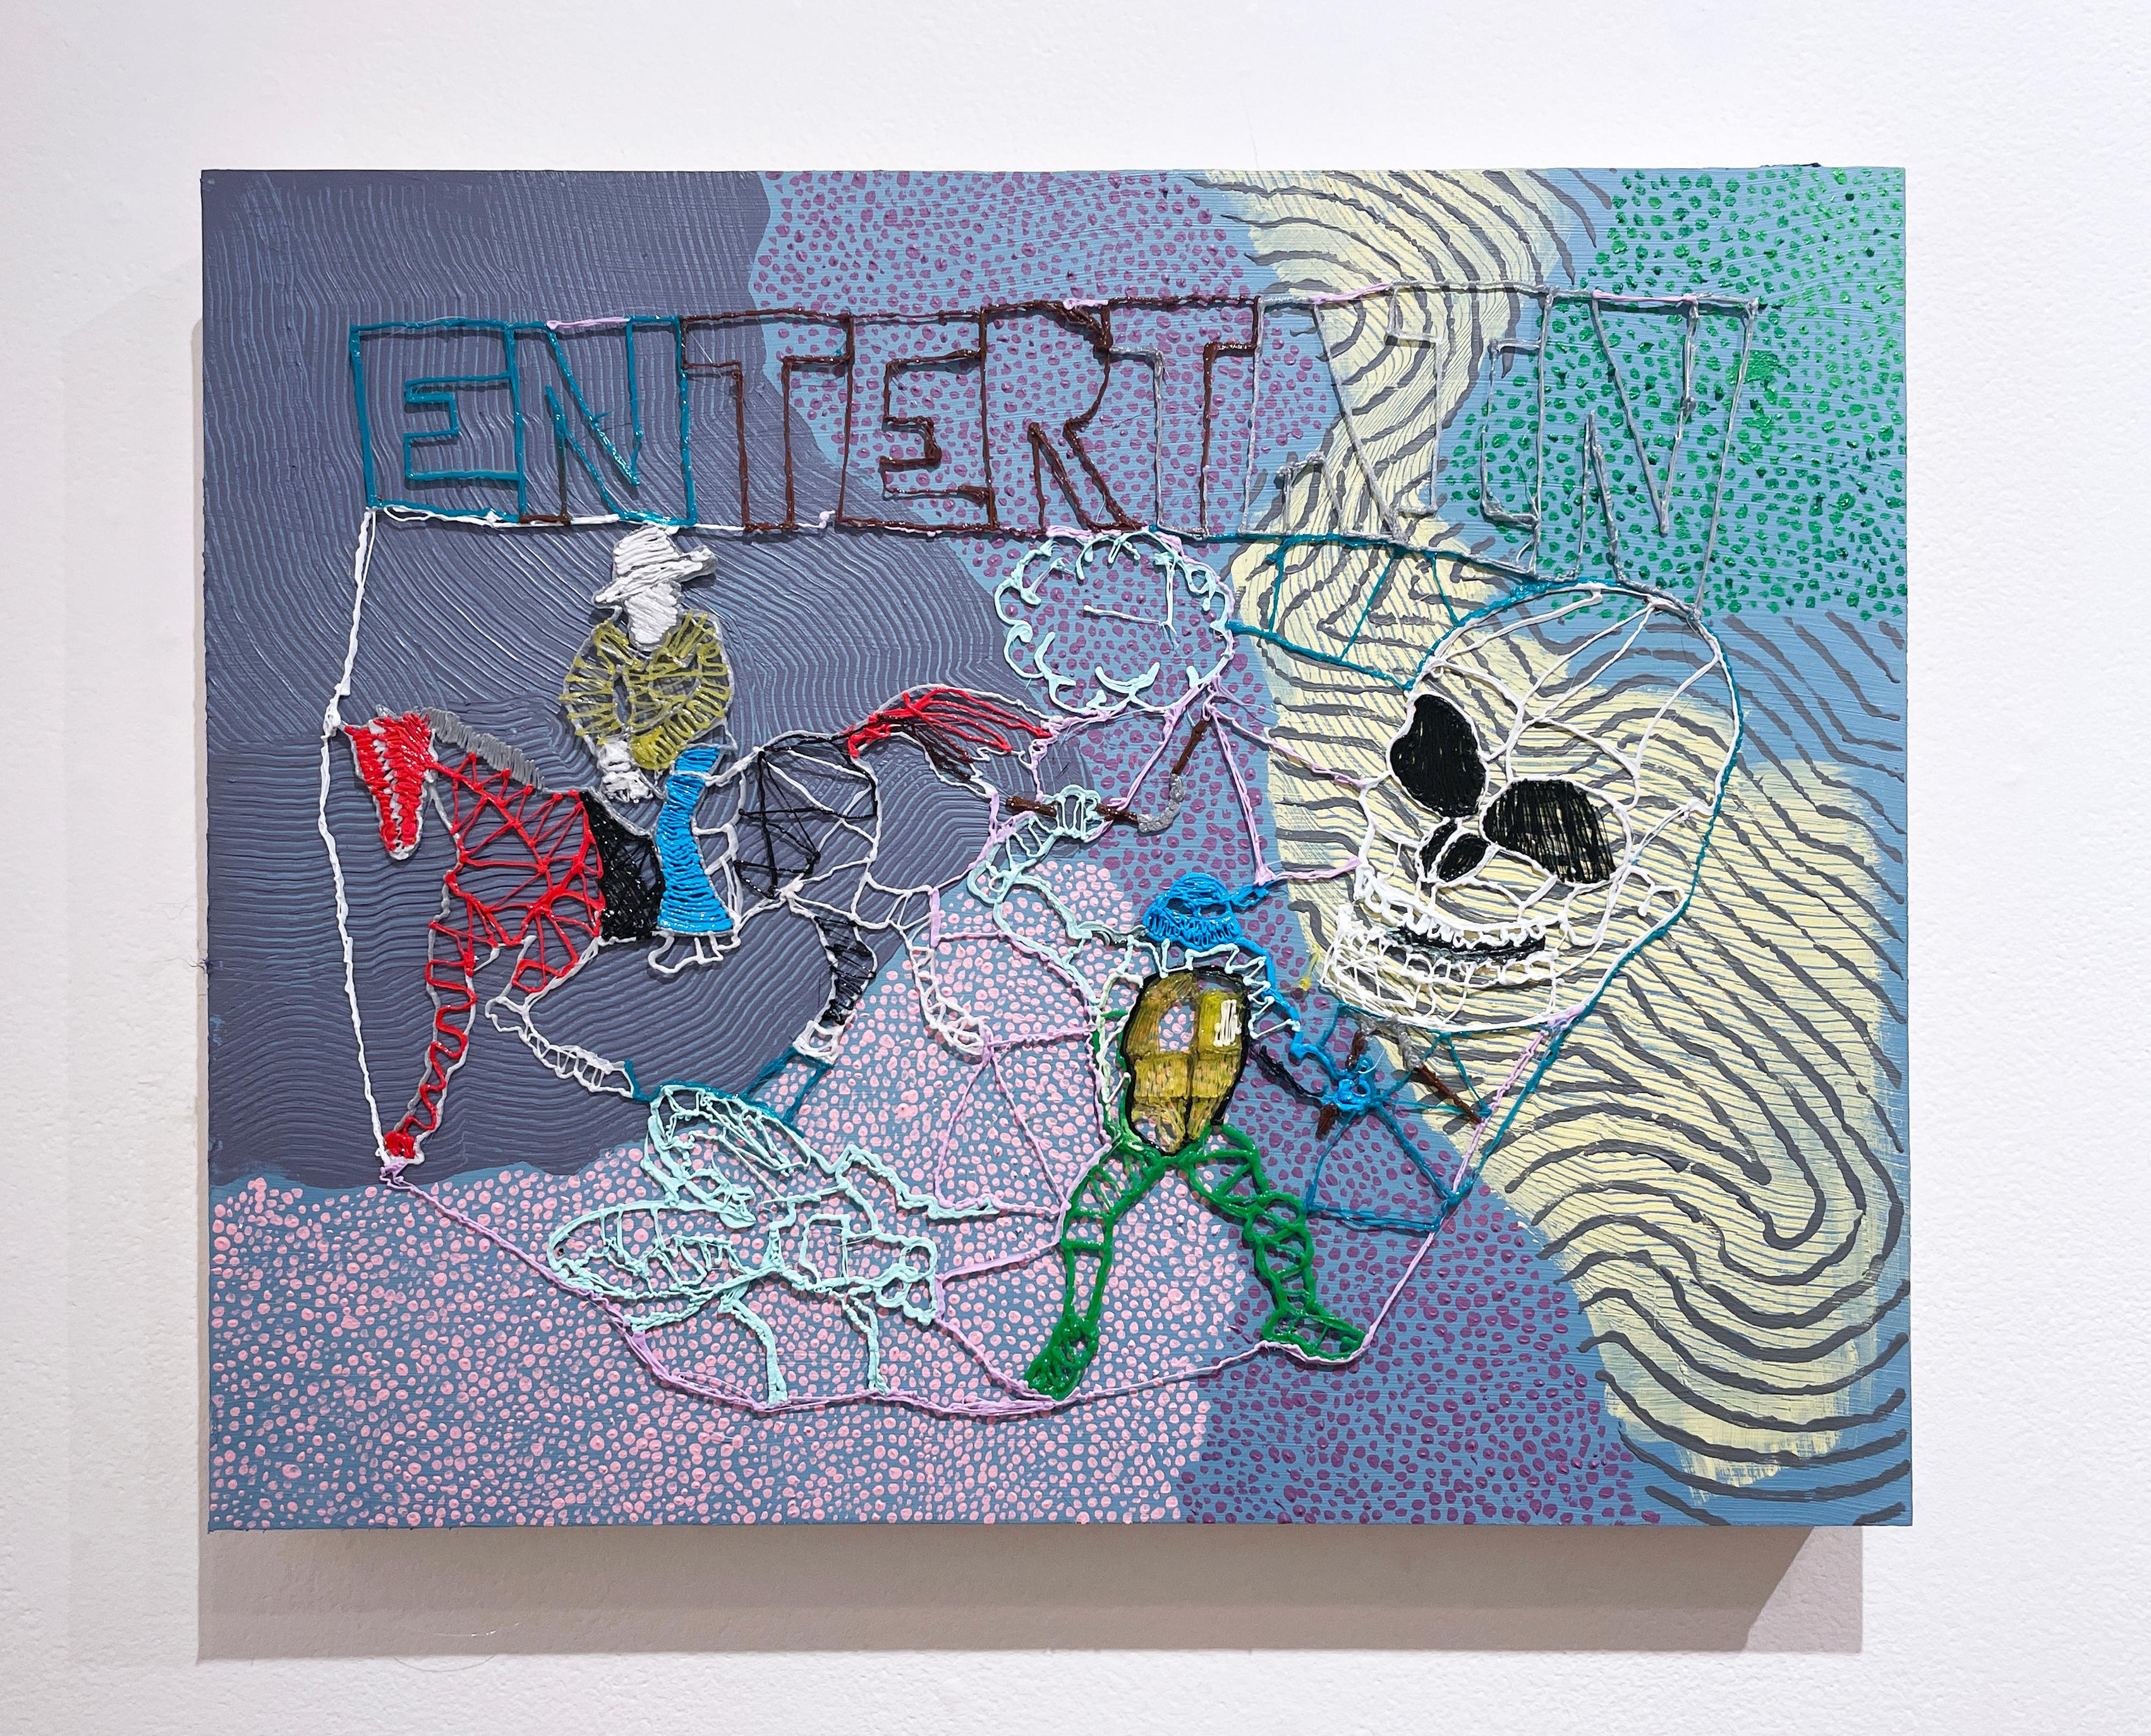 Entertain - Painting by Macauley Norman